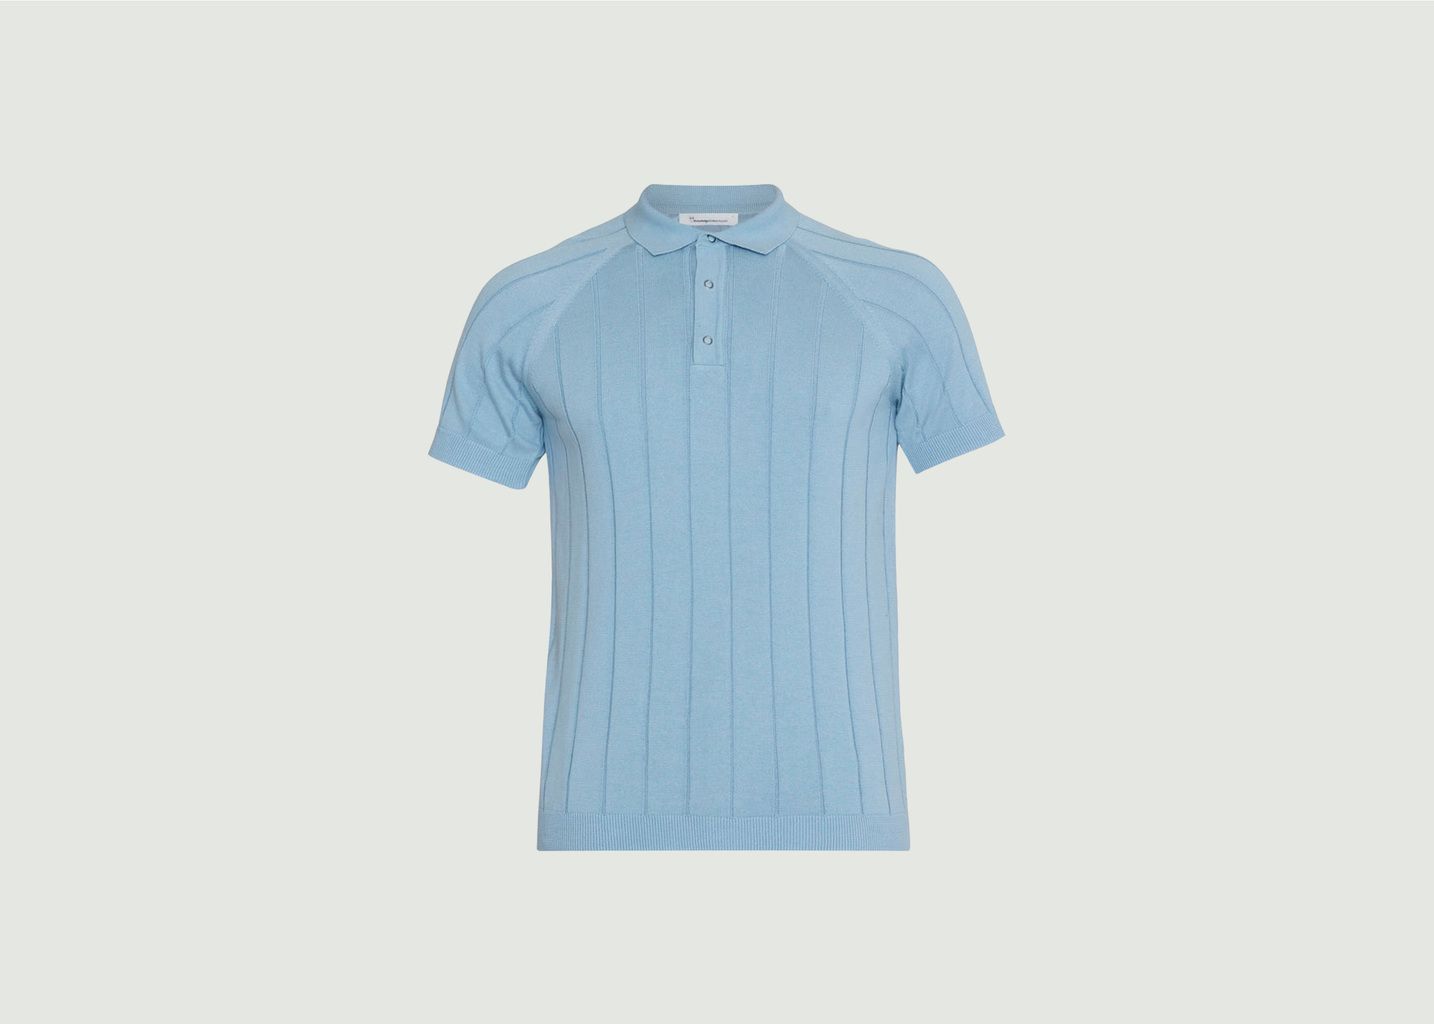 Knowledge Cotton Apparel  Regular Short-sleeved Striped Knit Polo Shirt